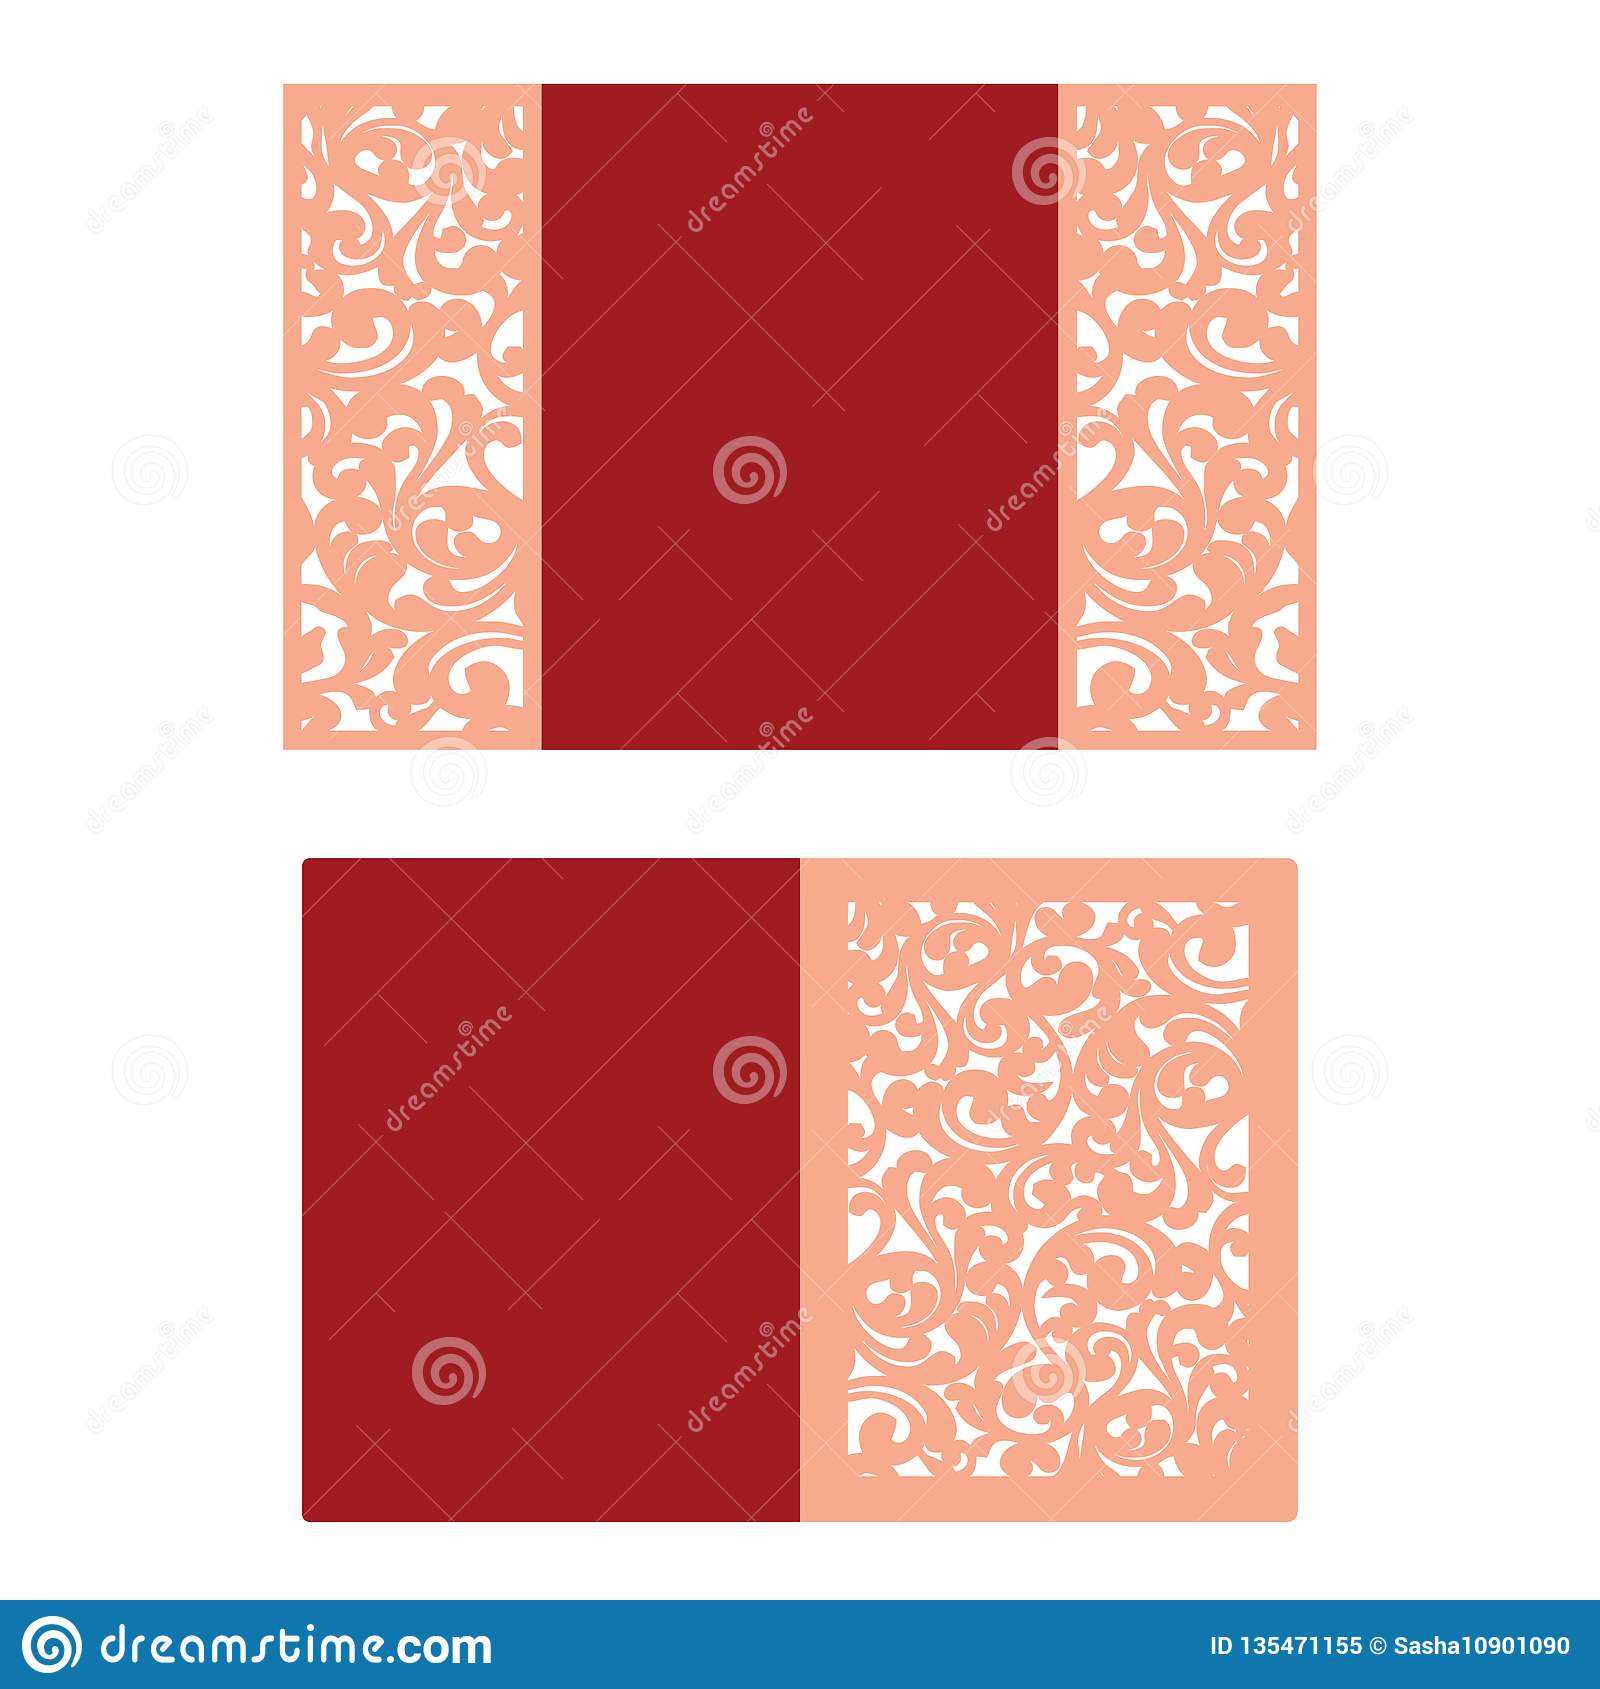 Paper Cut Out Card. Laser Cut Pattern For Invitation Card In Fold Out Card Template